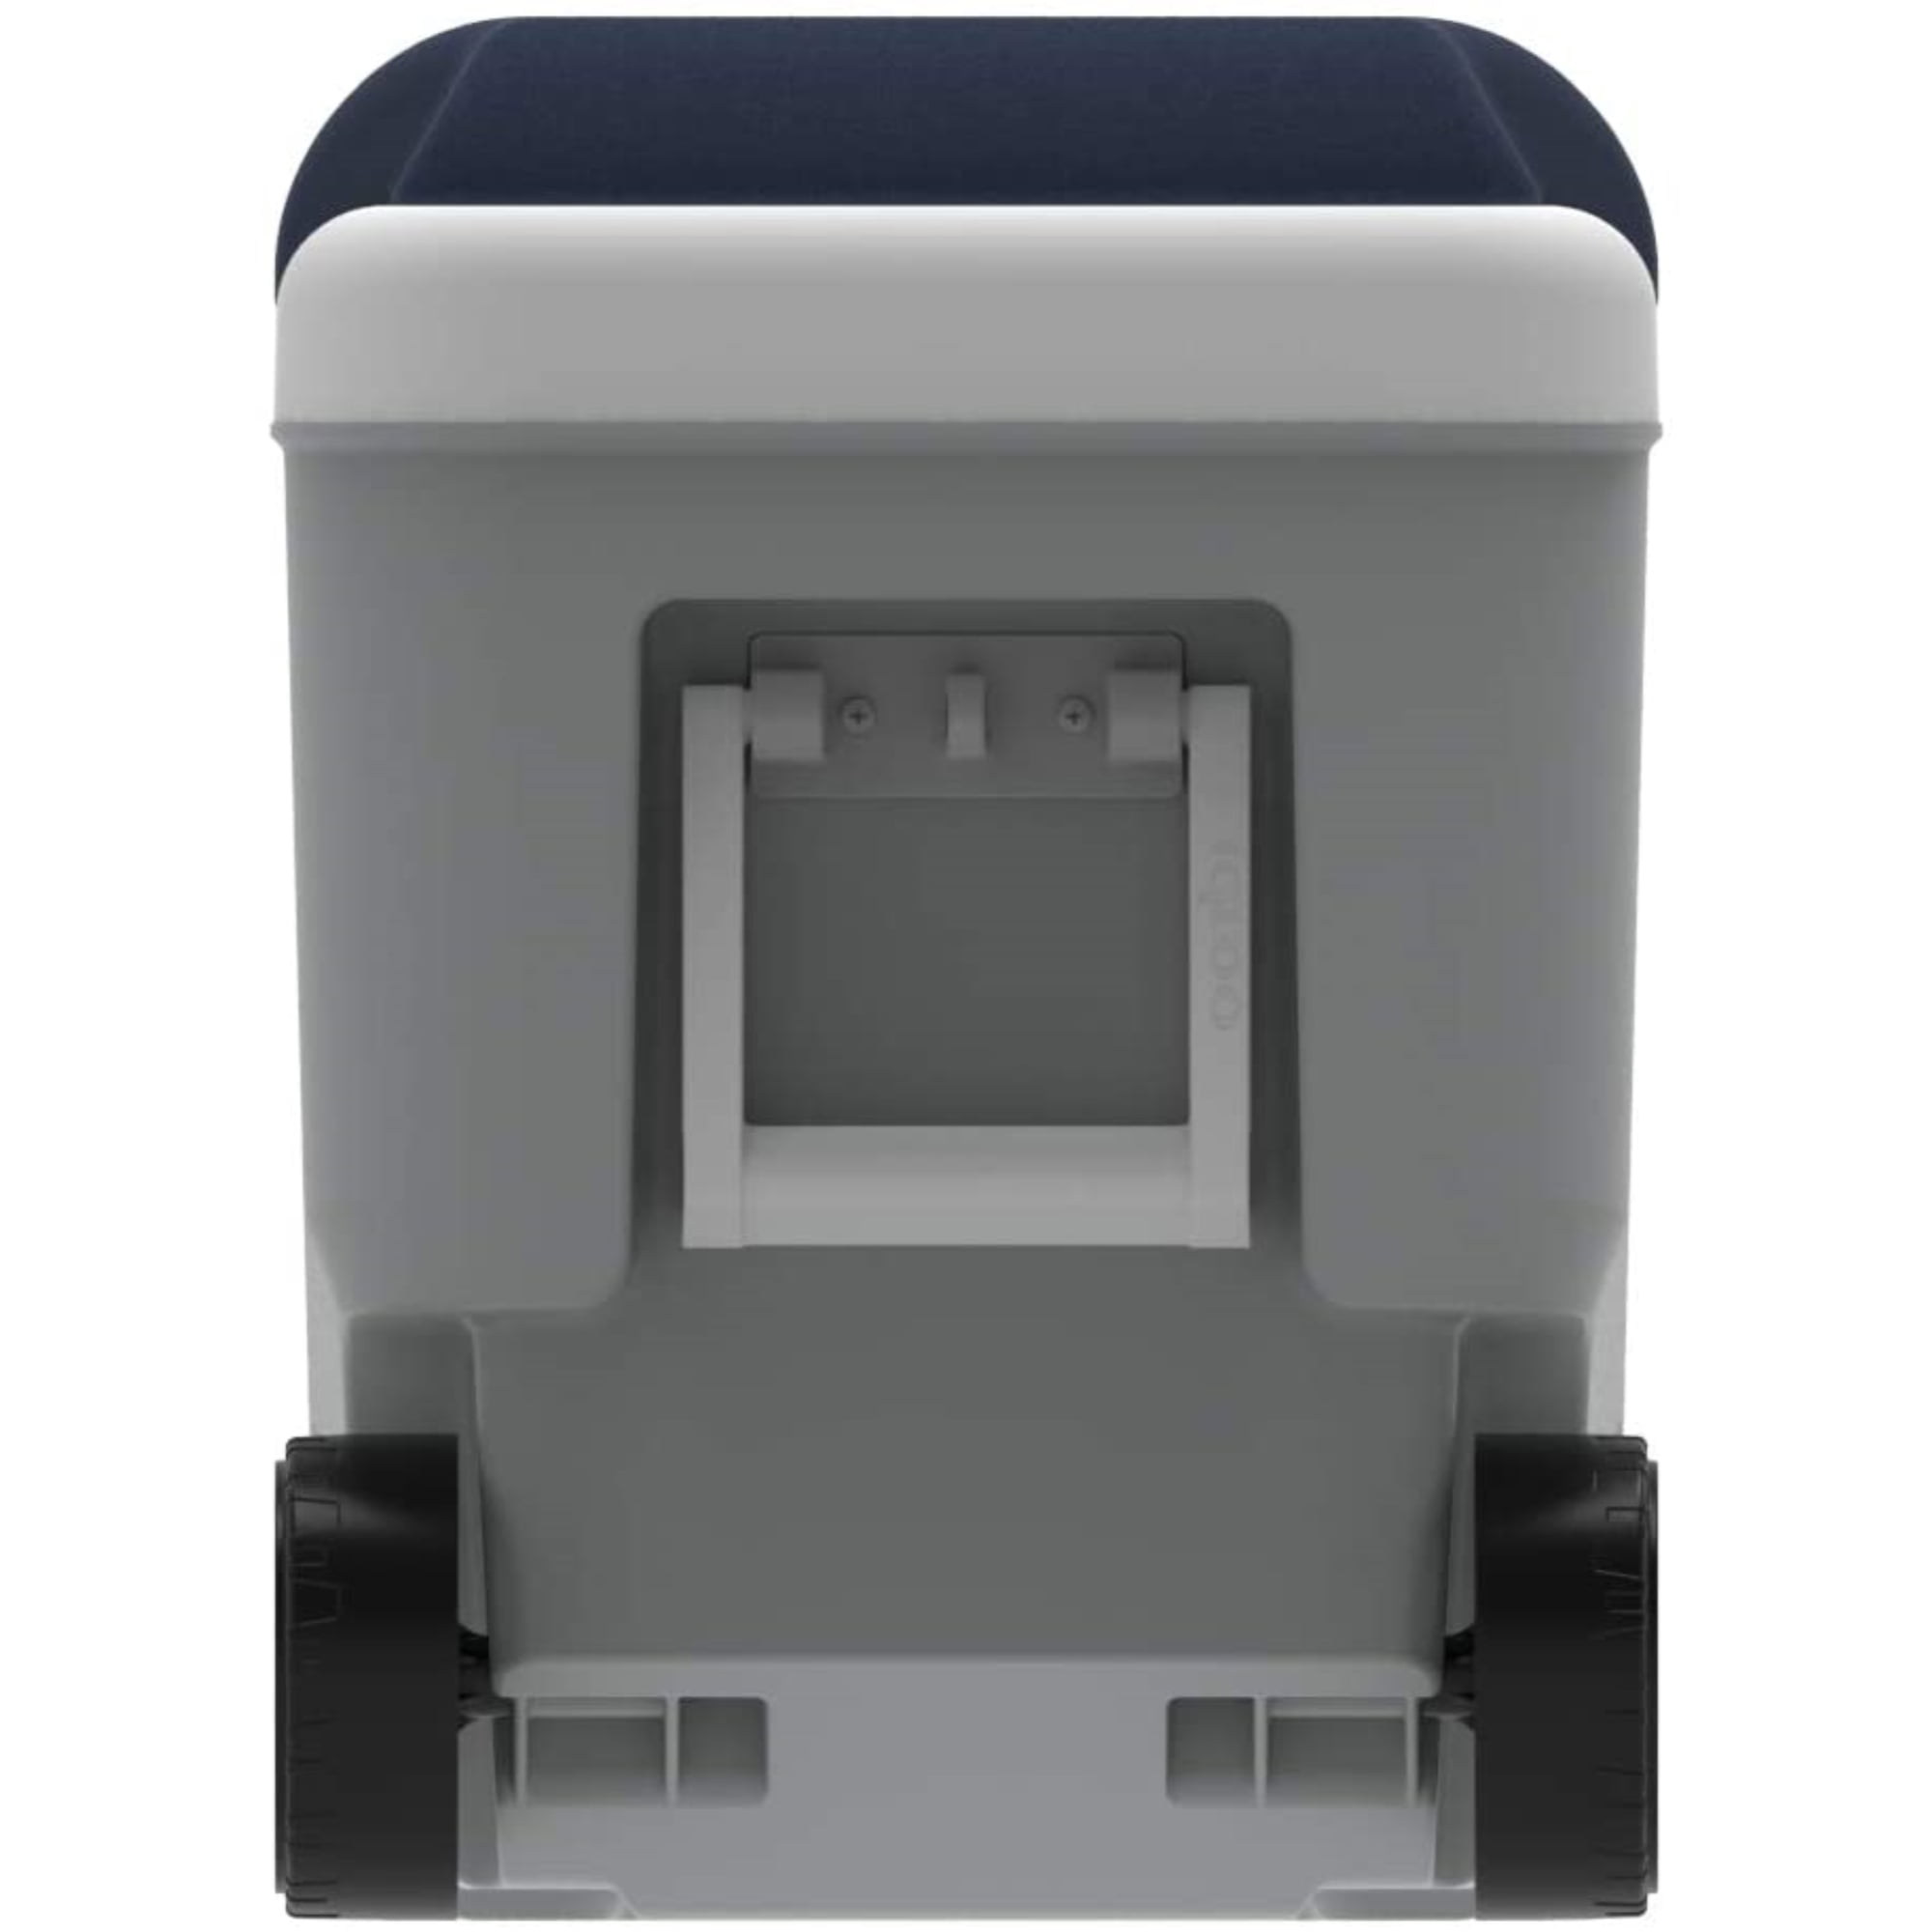 MaxCold 40 qt. Carbonite Roller Cooler by Igloo at Fleet Farm